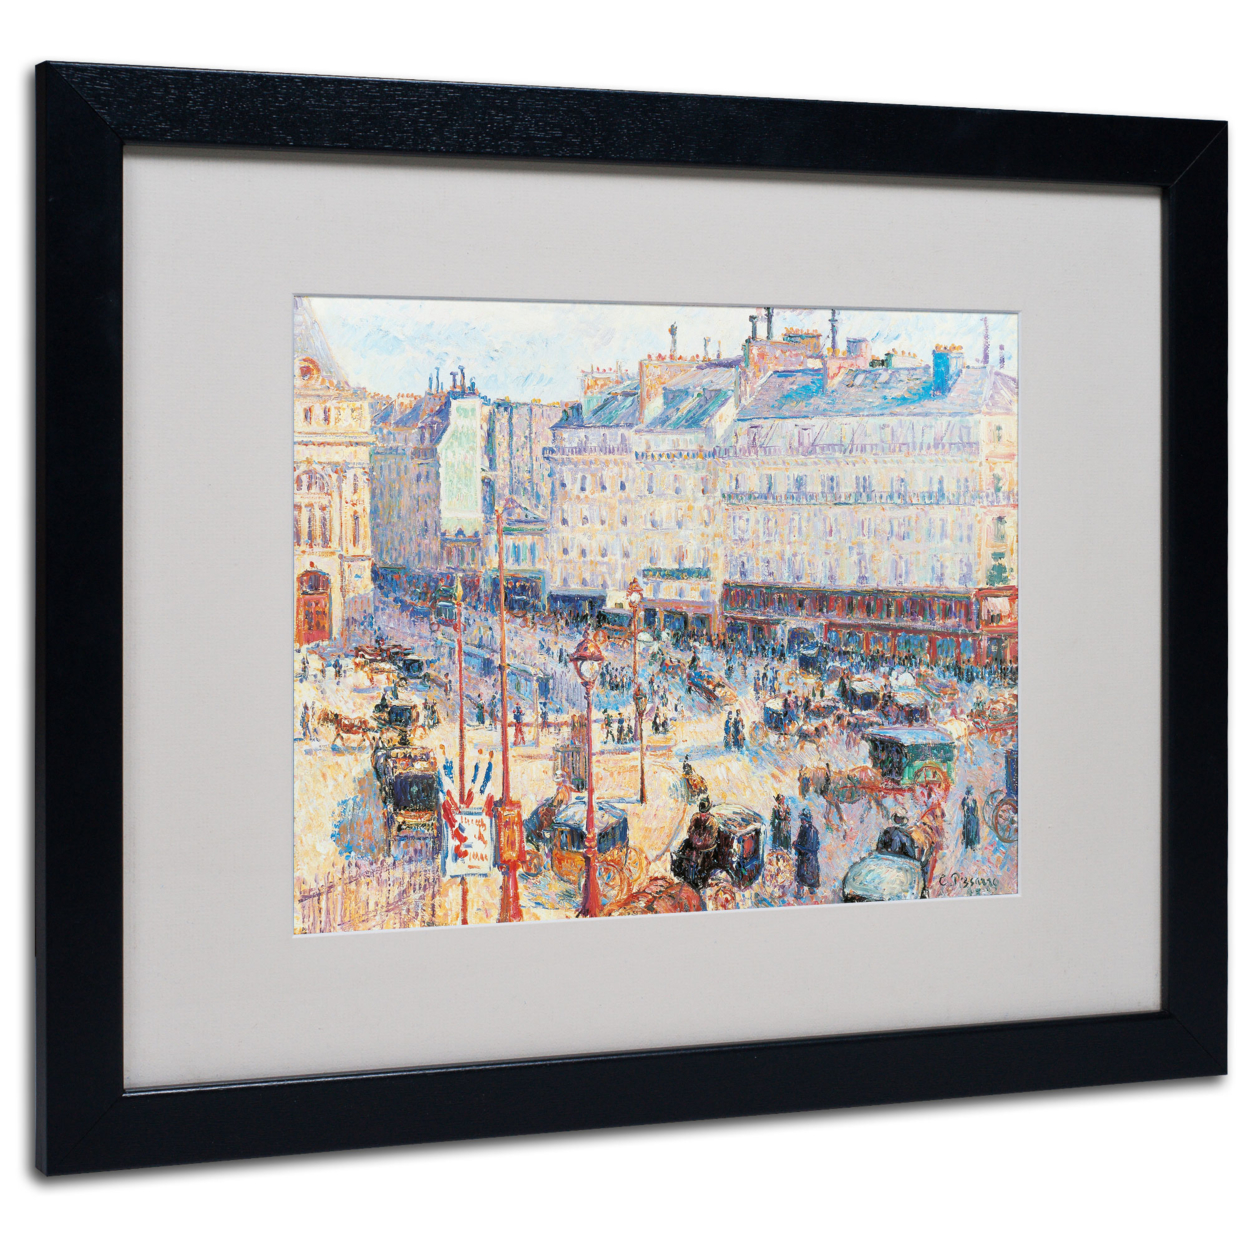 Camille Pissarro 'Place Du Havre 1893' Black Wooden Framed Art 18 X 22 Inches